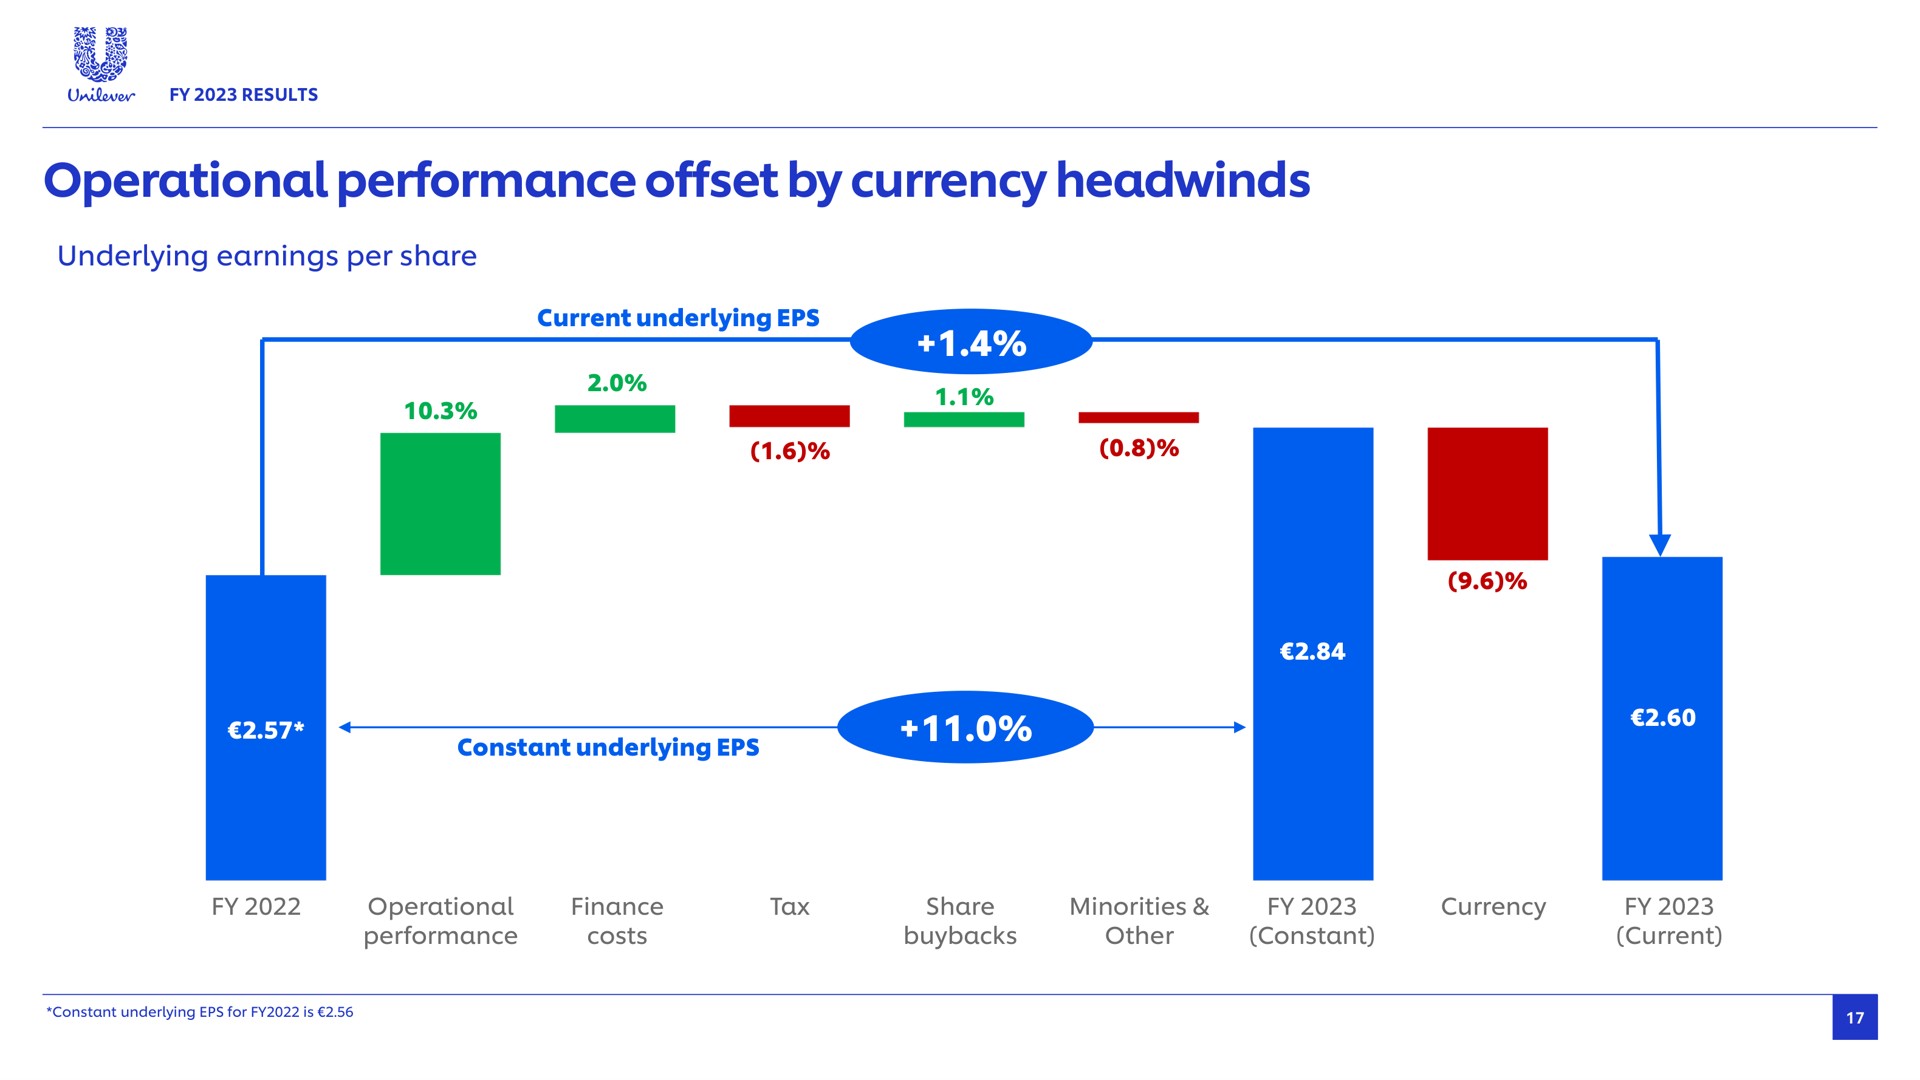 operational performance offset by currency underlying earnings per share current underlying constant underlying finance costs tax share minorities other constant current | Unilever